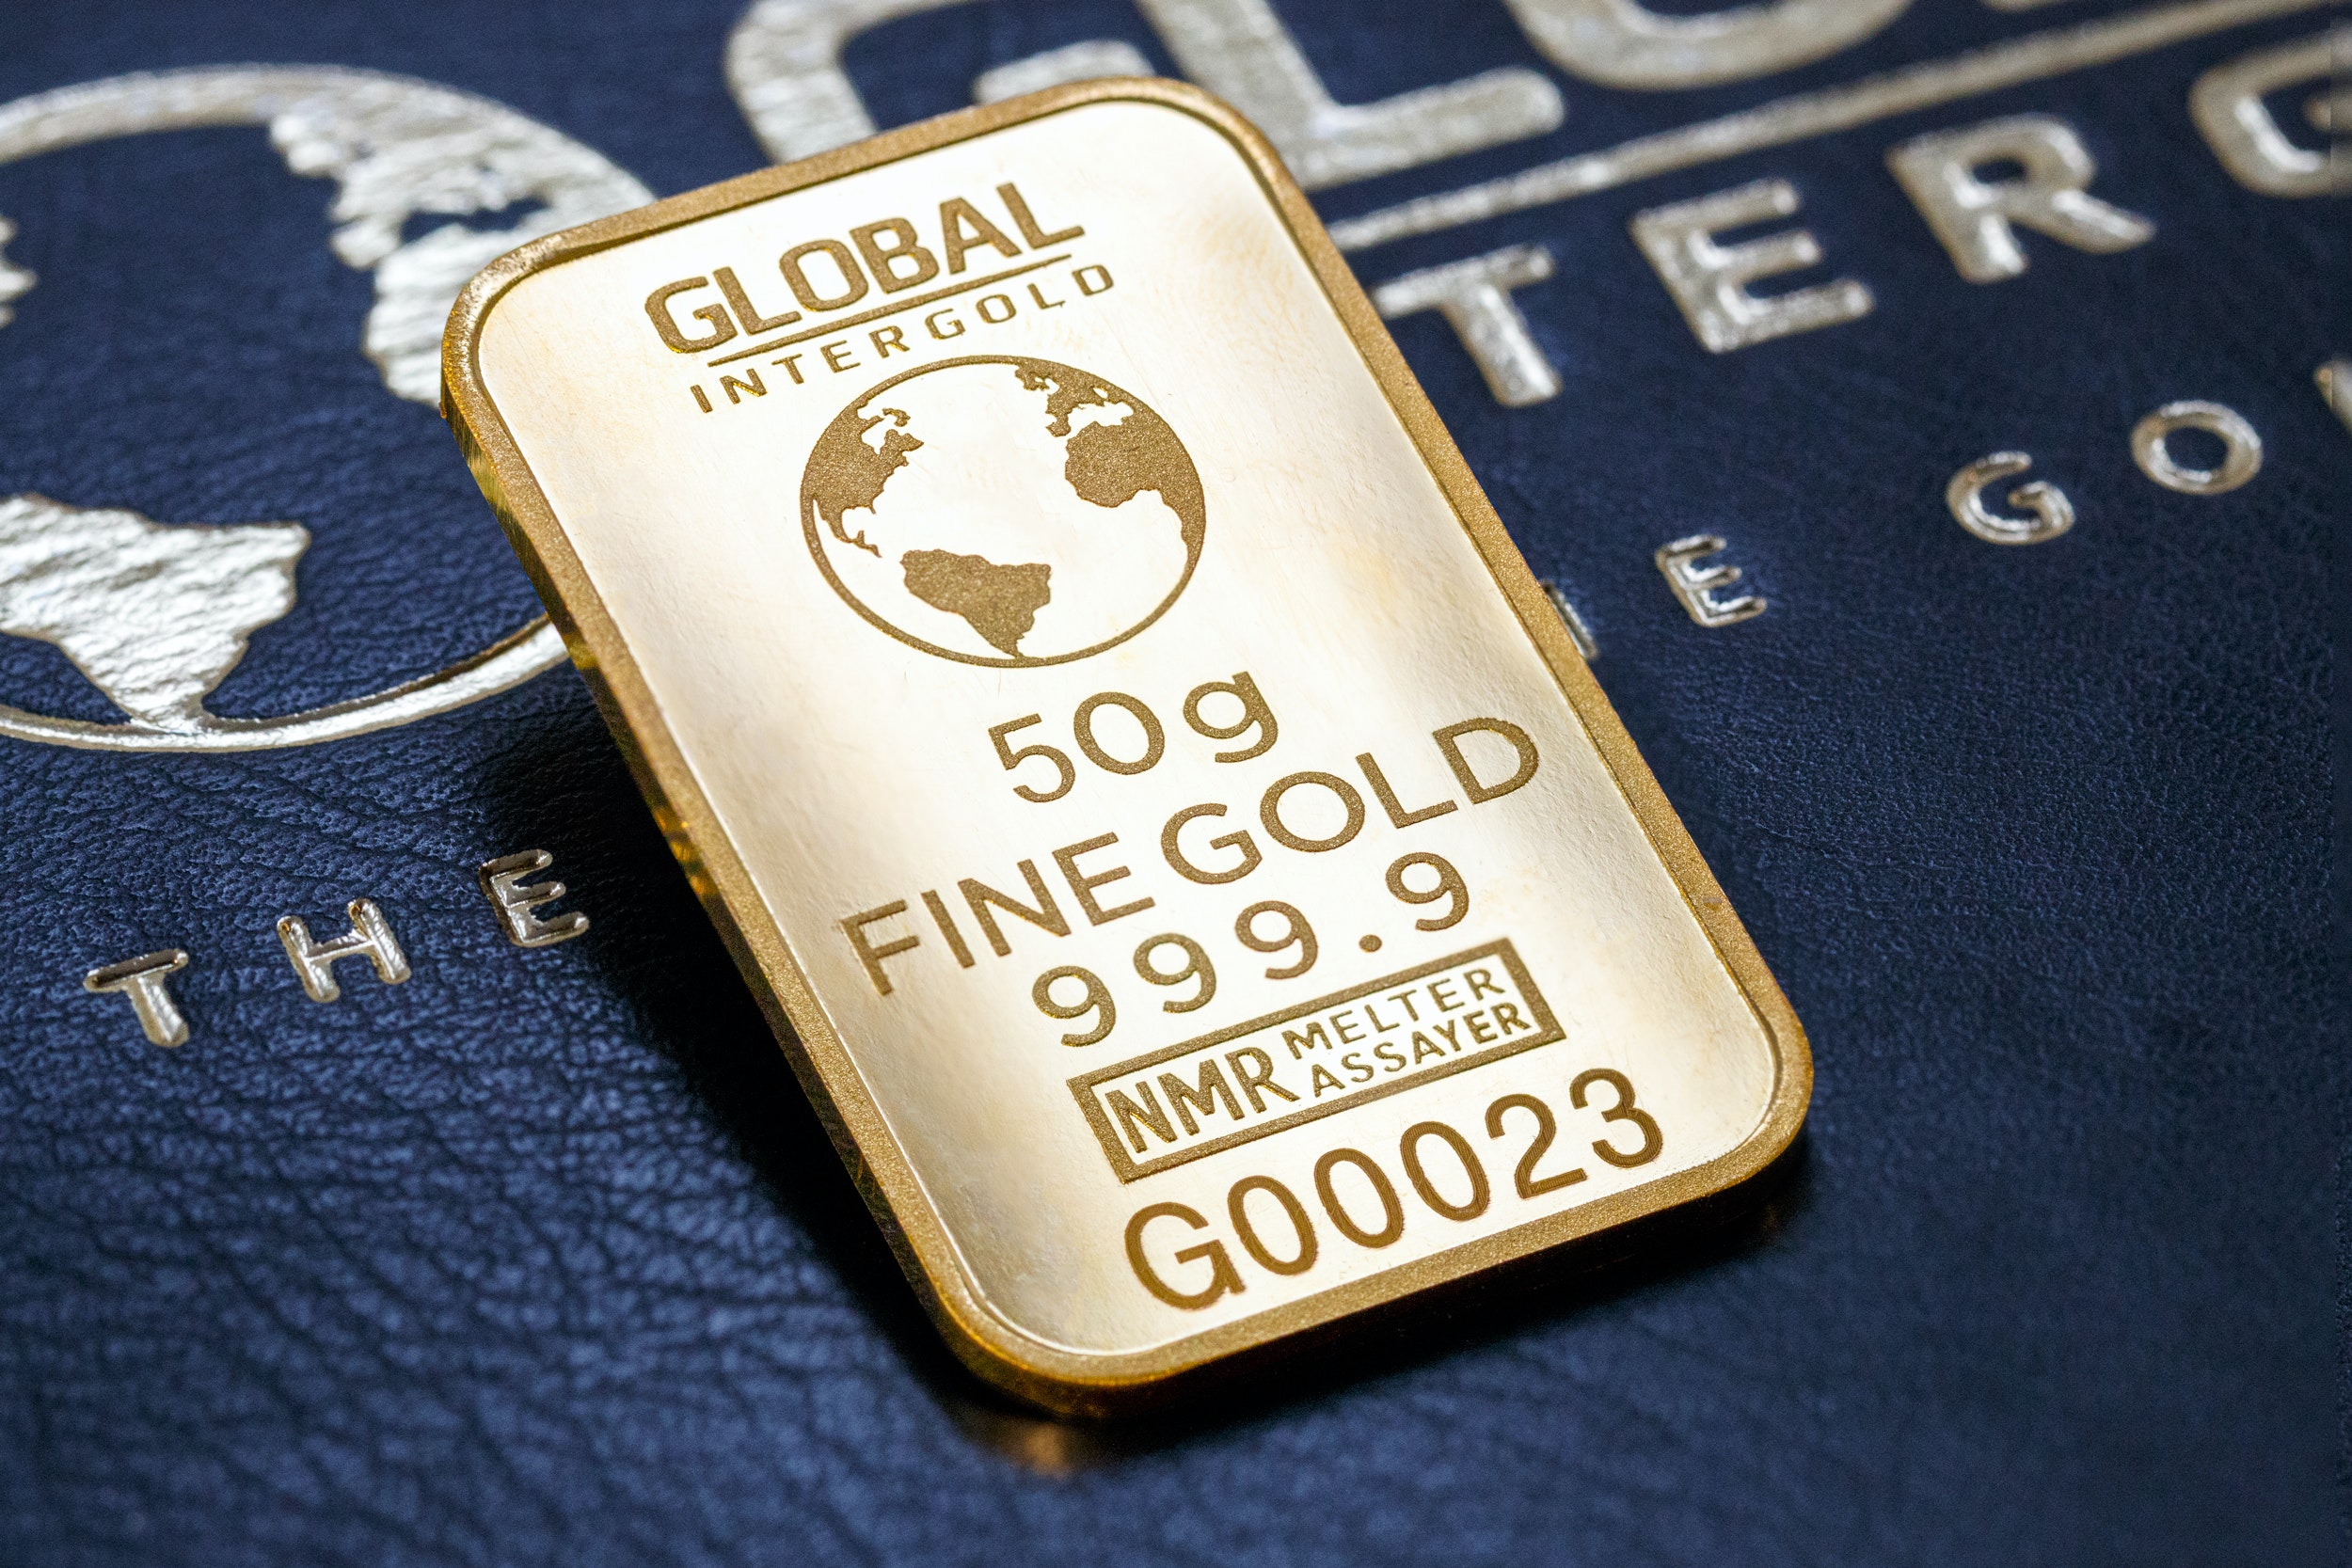 Thinking About gold ira tax rules? 10 Reasons Why It's Time To Stop!